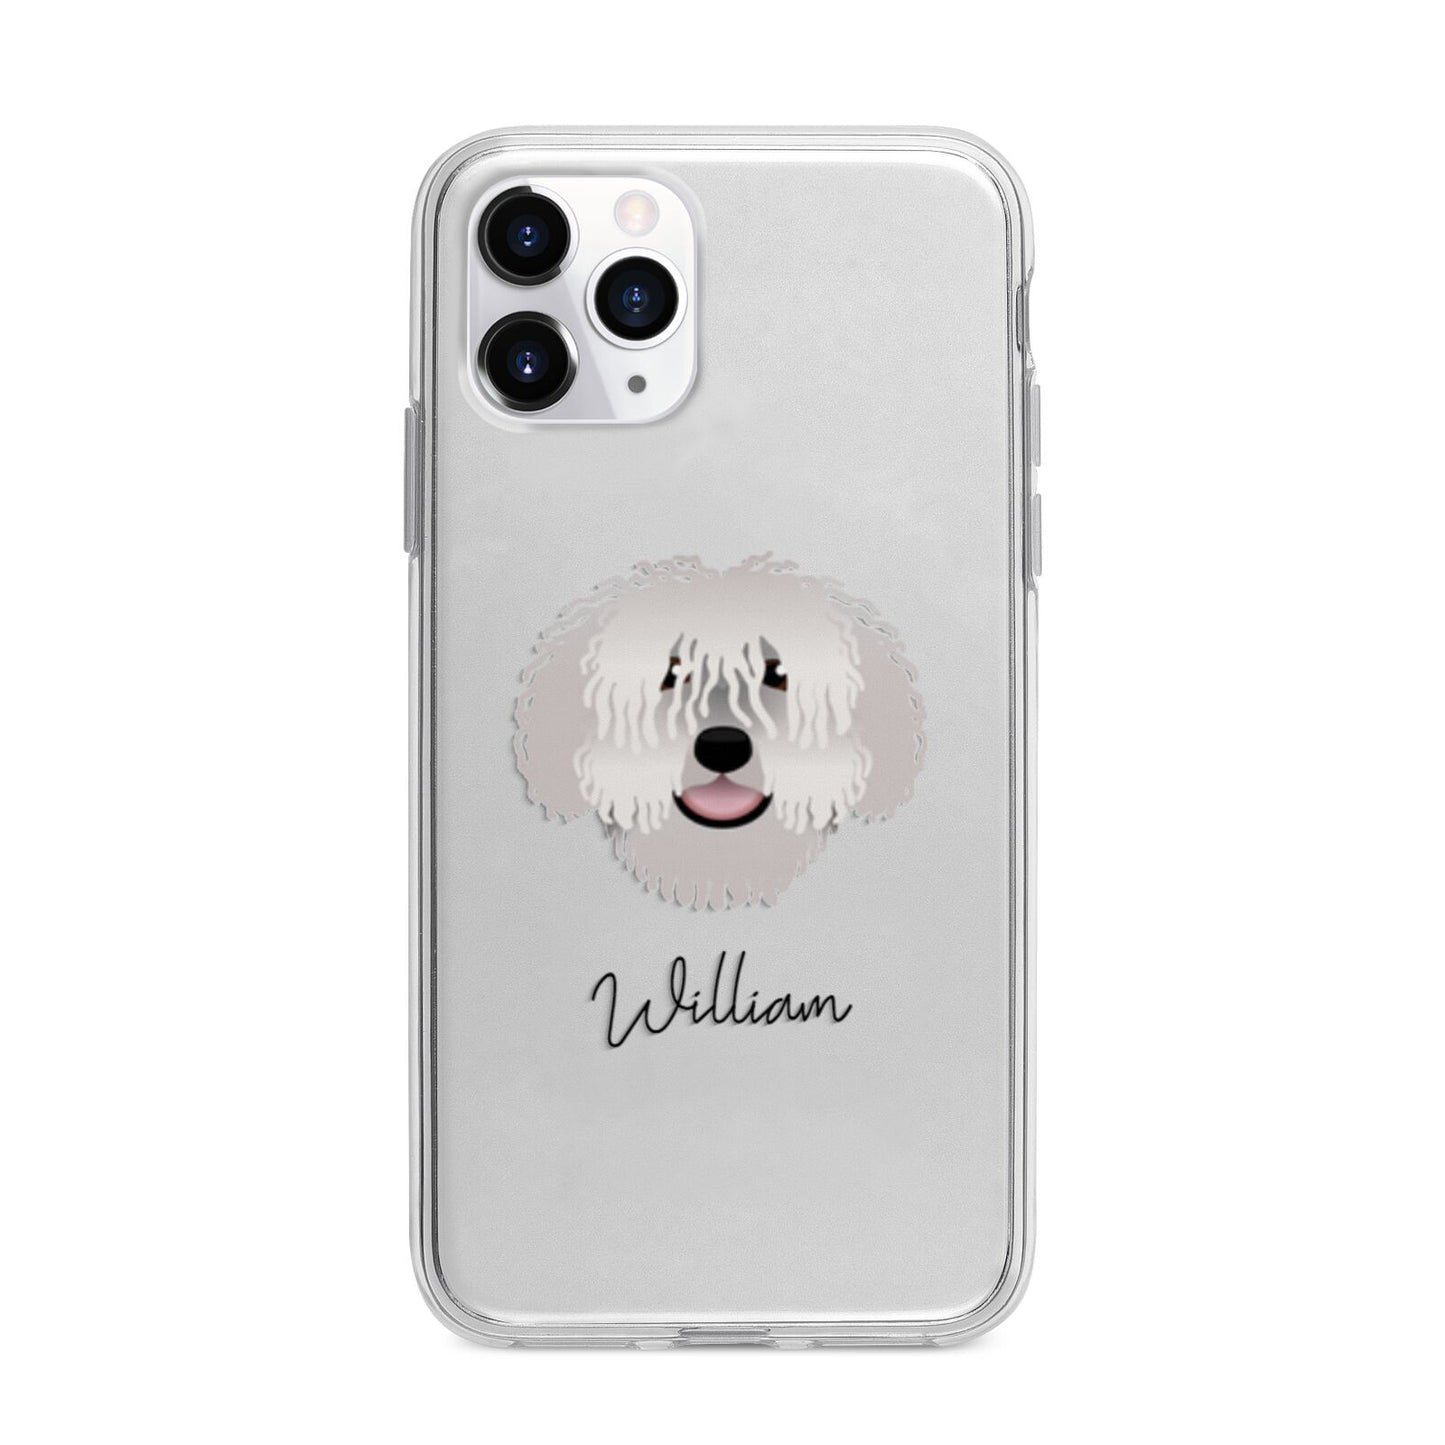 Spanish Water Dog Personalised Apple iPhone 11 Pro in Silver with Bumper Case